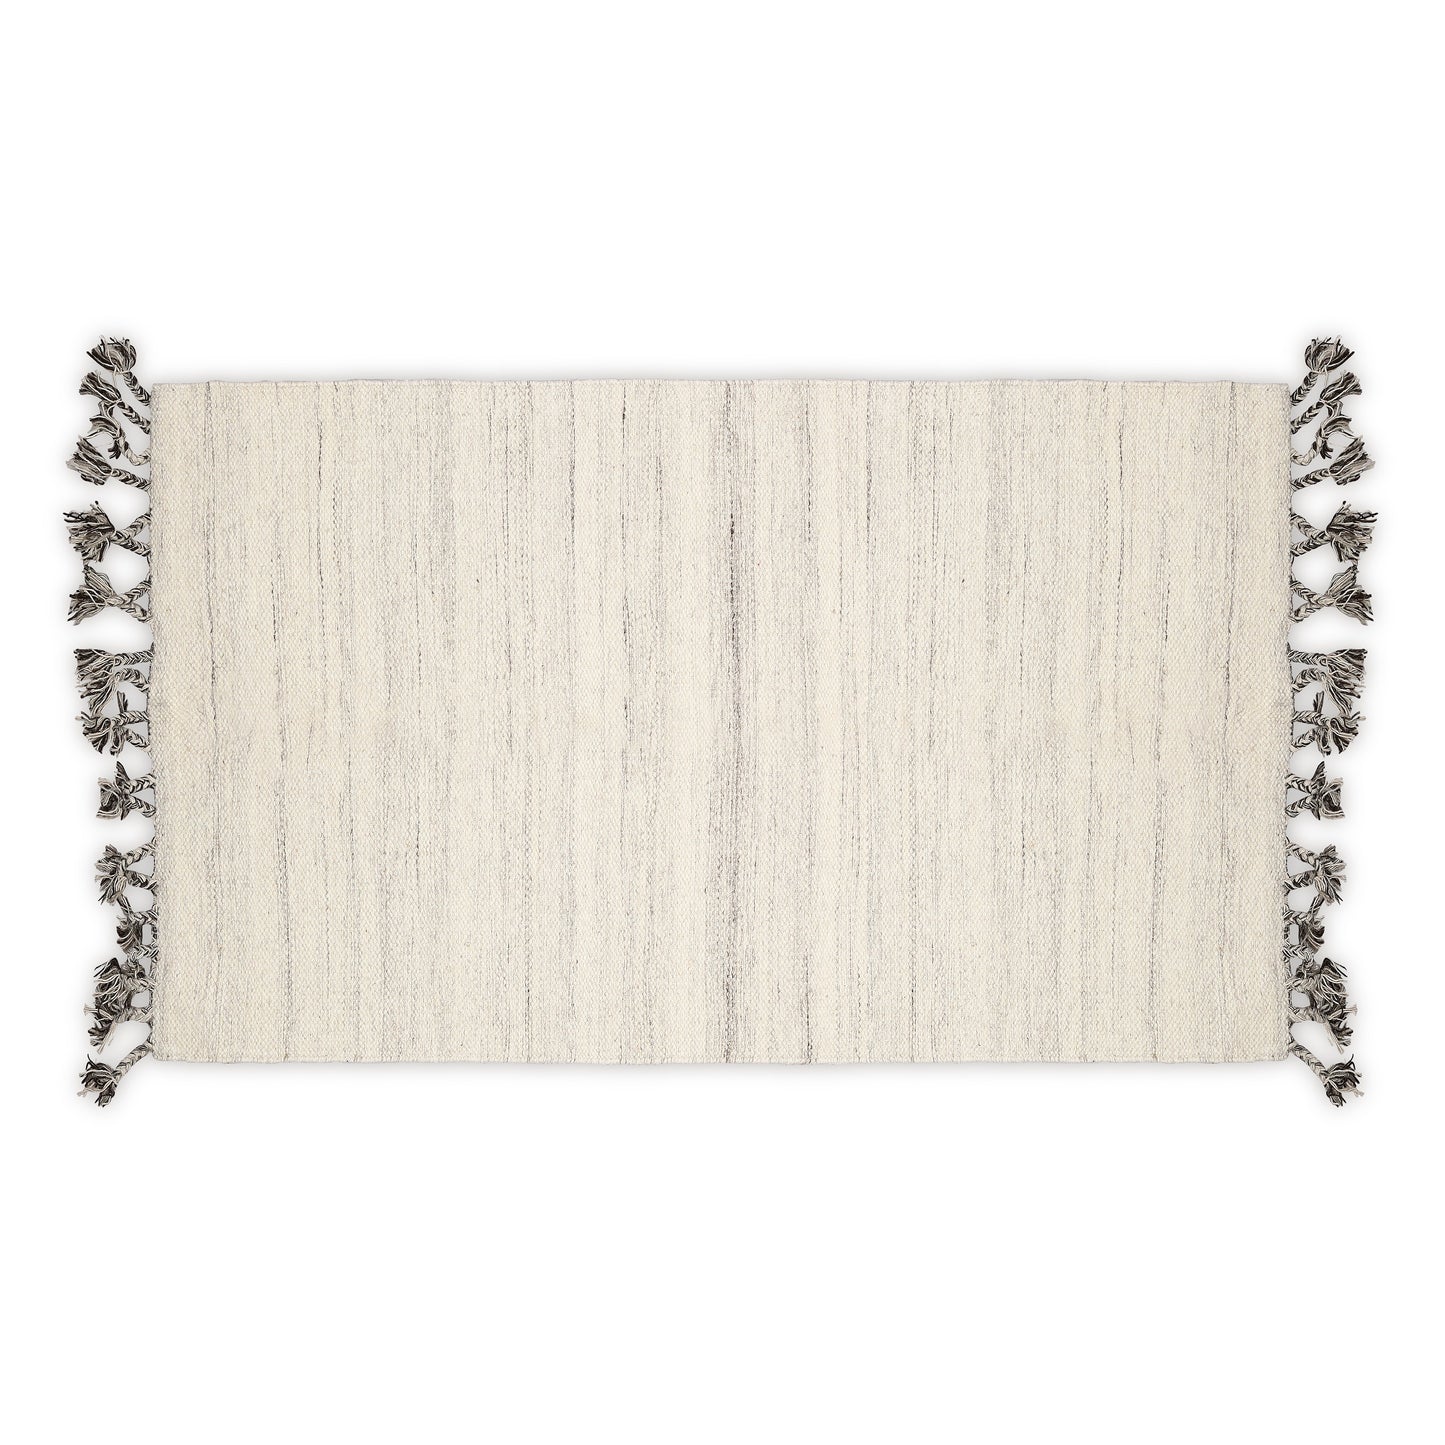 Hand Woven Wool Area Rug Woven White With Gray Shades 1224